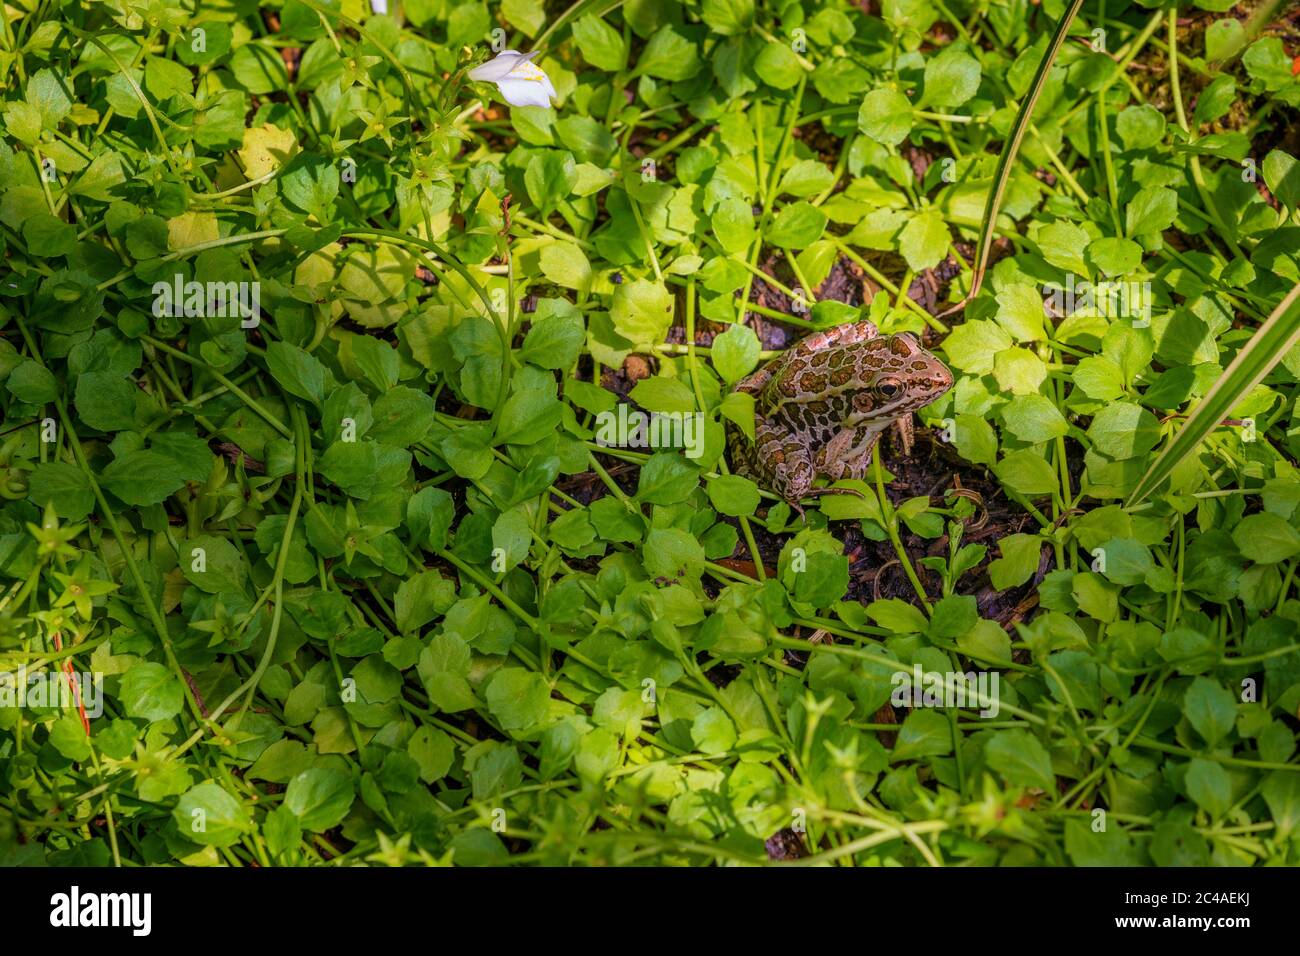 A Prickerel Frog one of 21 species of frogs and toads in Tennessee. Stock Photo